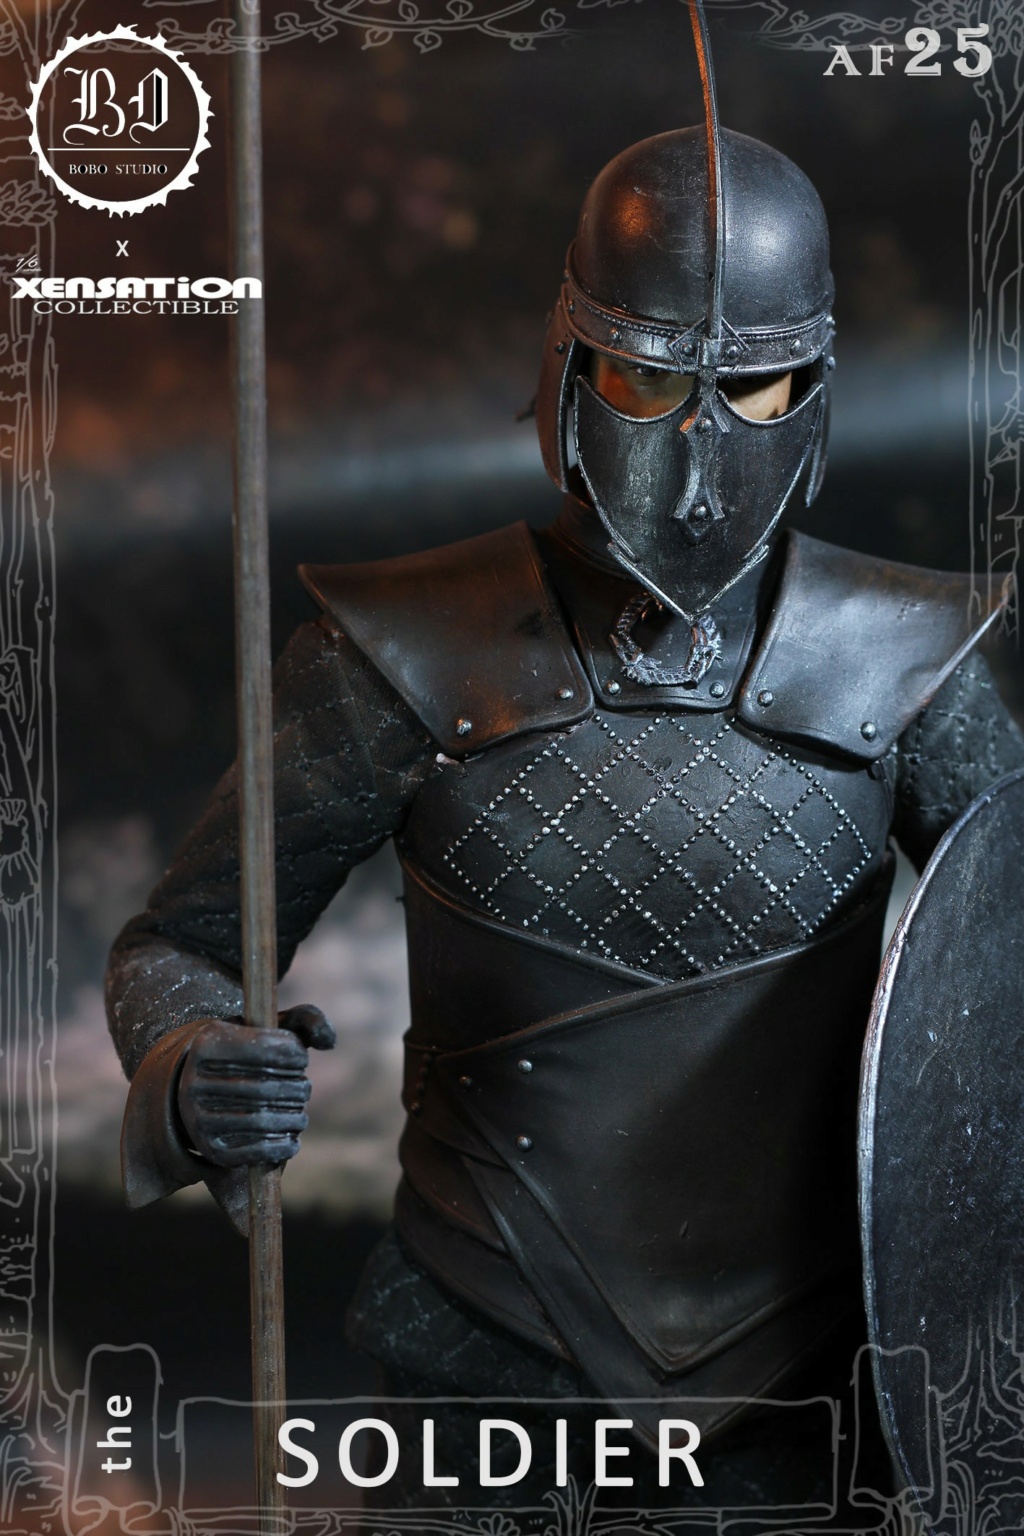 Soldier - NEW PRODUCT: Xensation Collectible & BoBo Studio: 1/6 Grey Worm Soldier Collectible Doll AF25 16134710